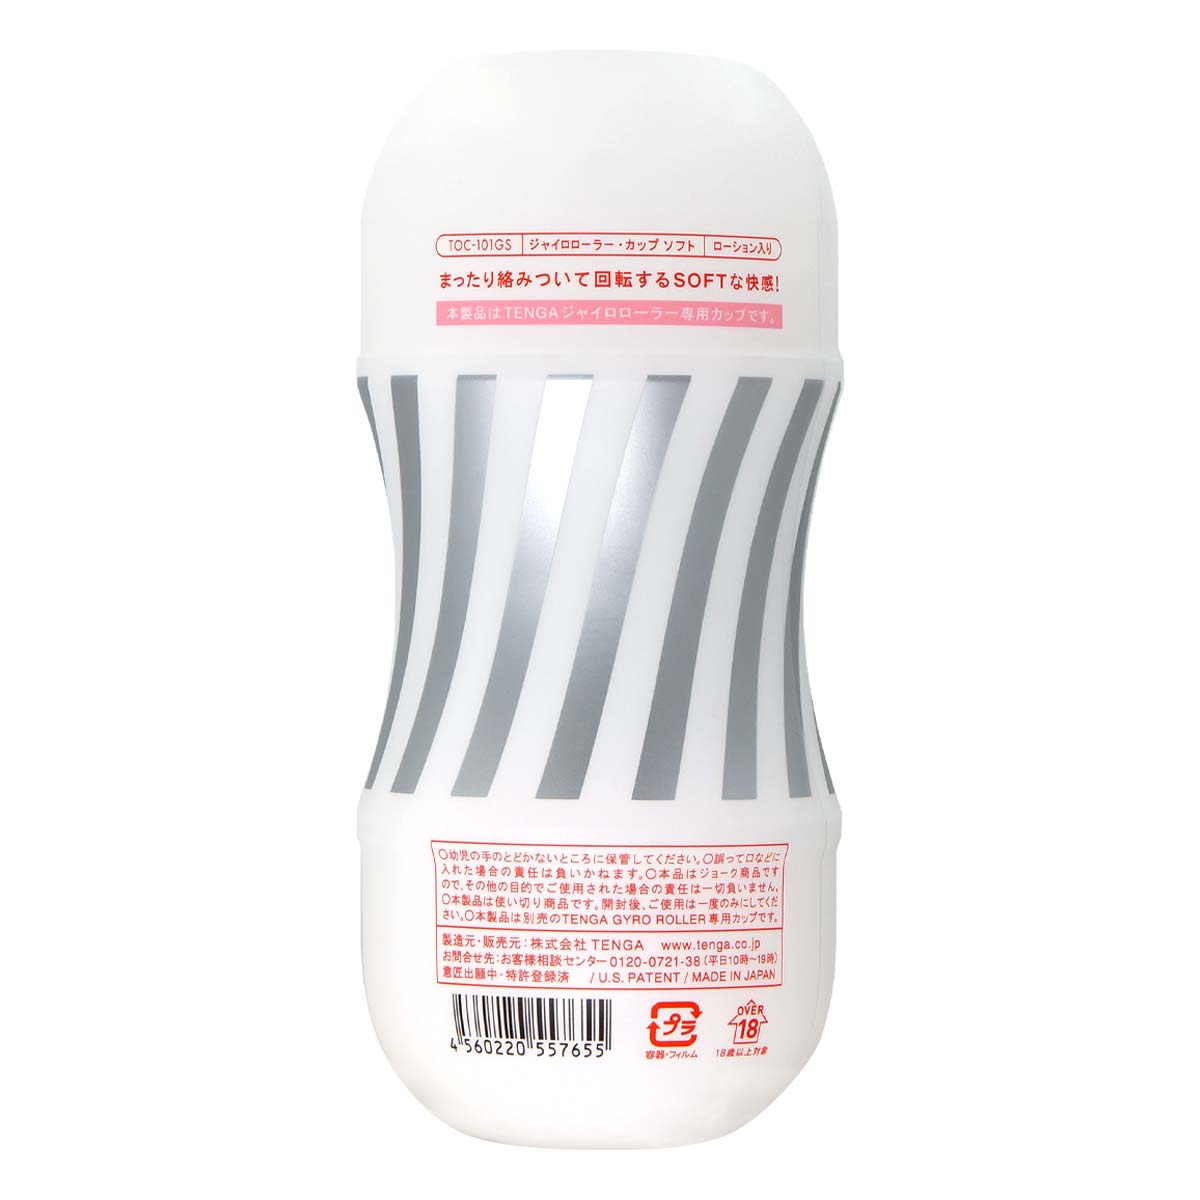 ROLLING TENGA GYRO ROLLER CUP SOFT-p_3